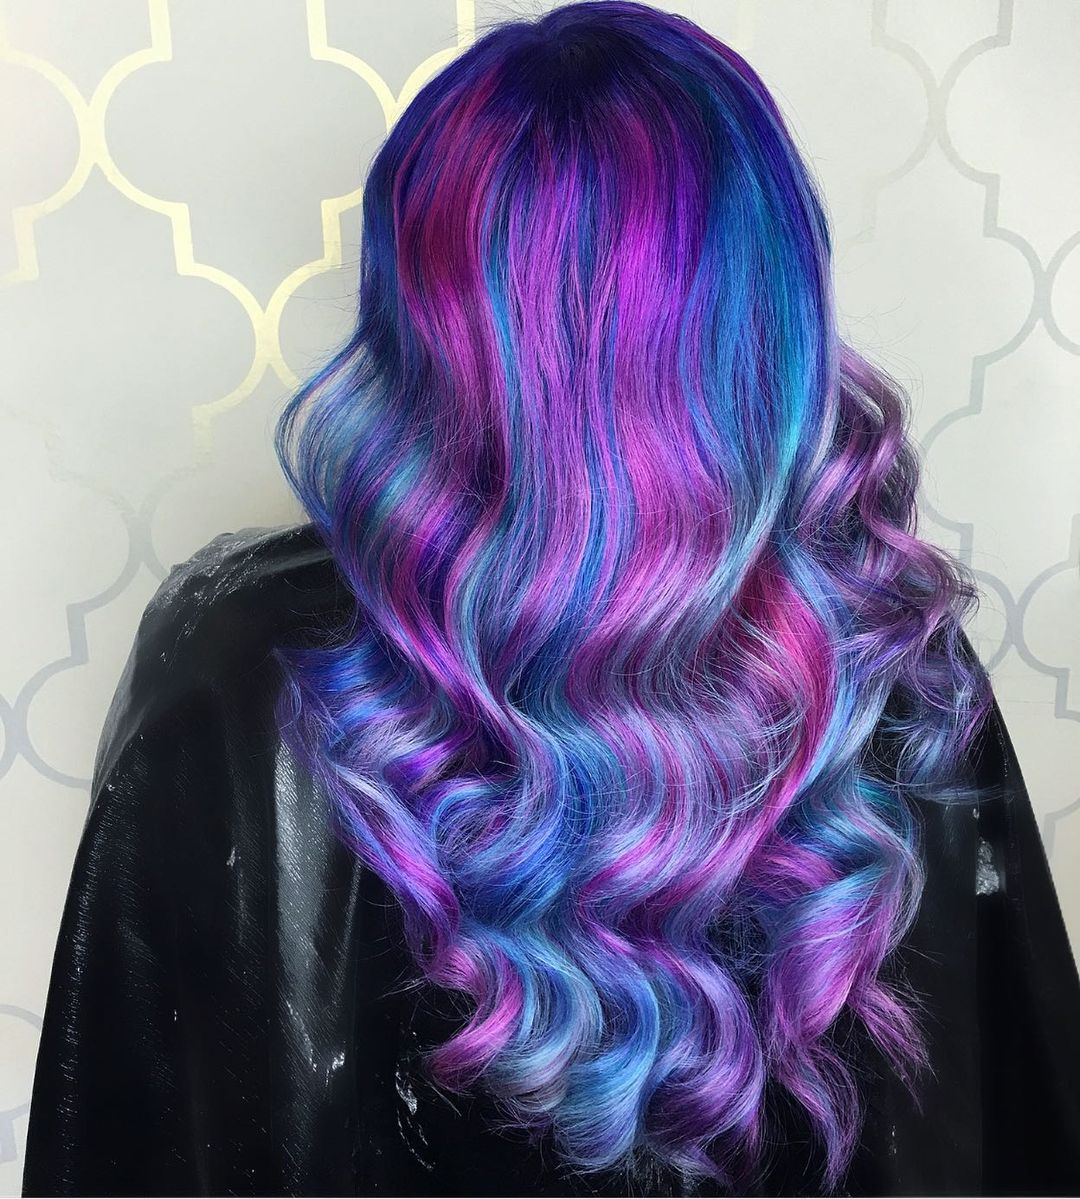 Blue hair with purple